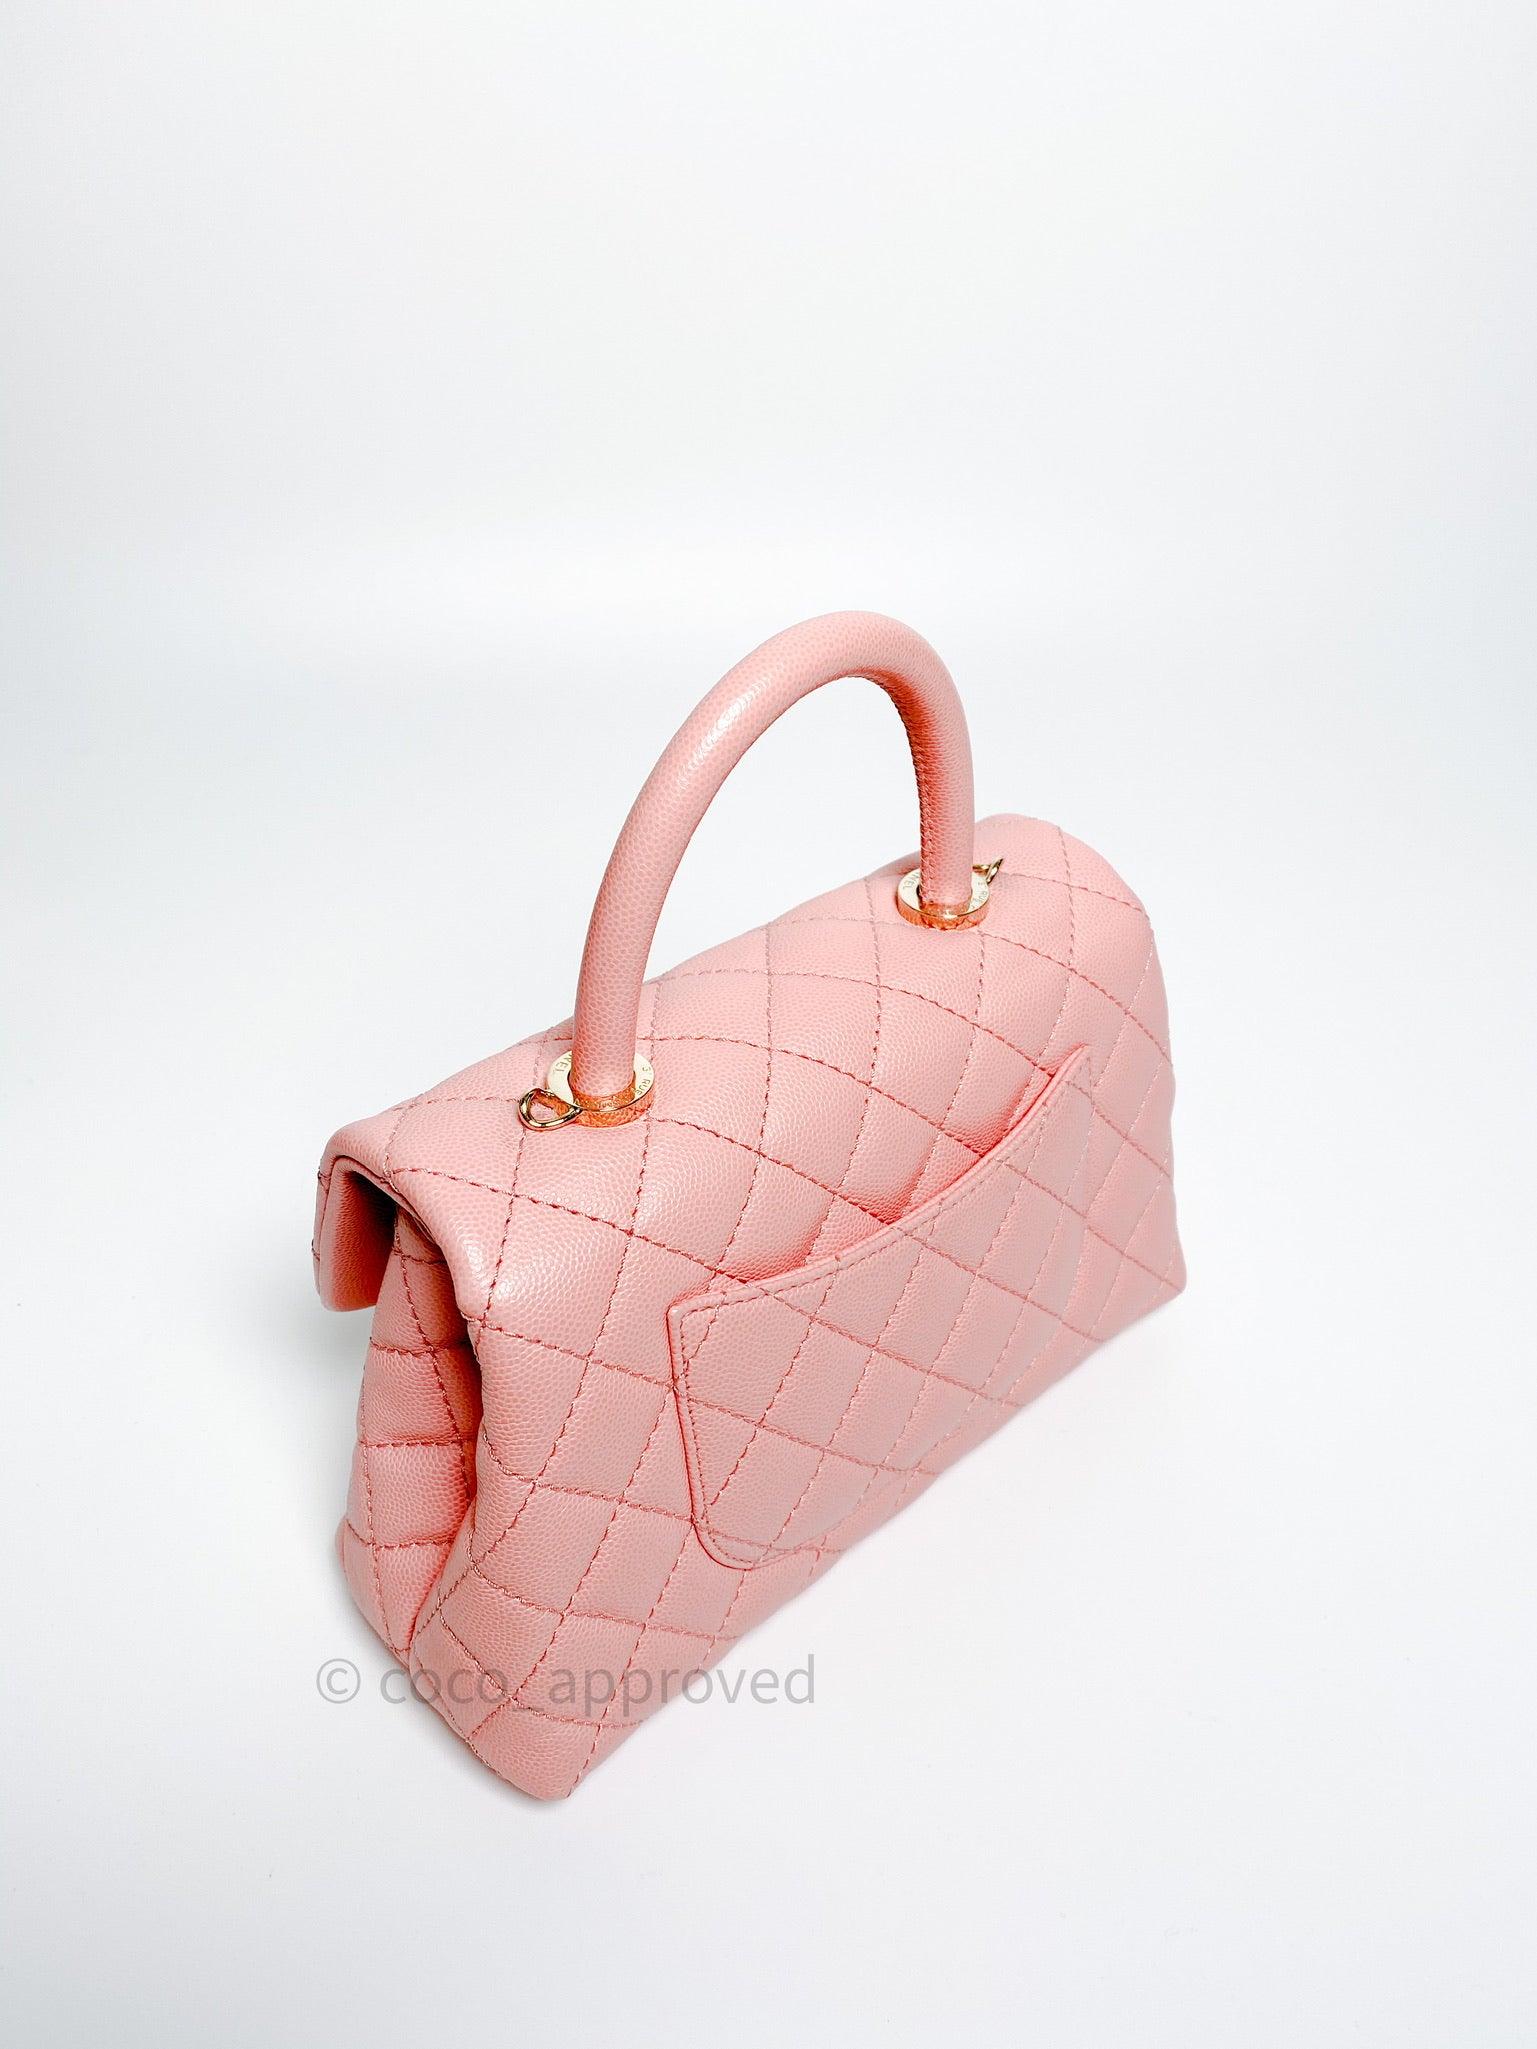 BNIB Authentic CHANEL Classic Quilted Iridescent Pink Mini Coco Handle Flap  Bag